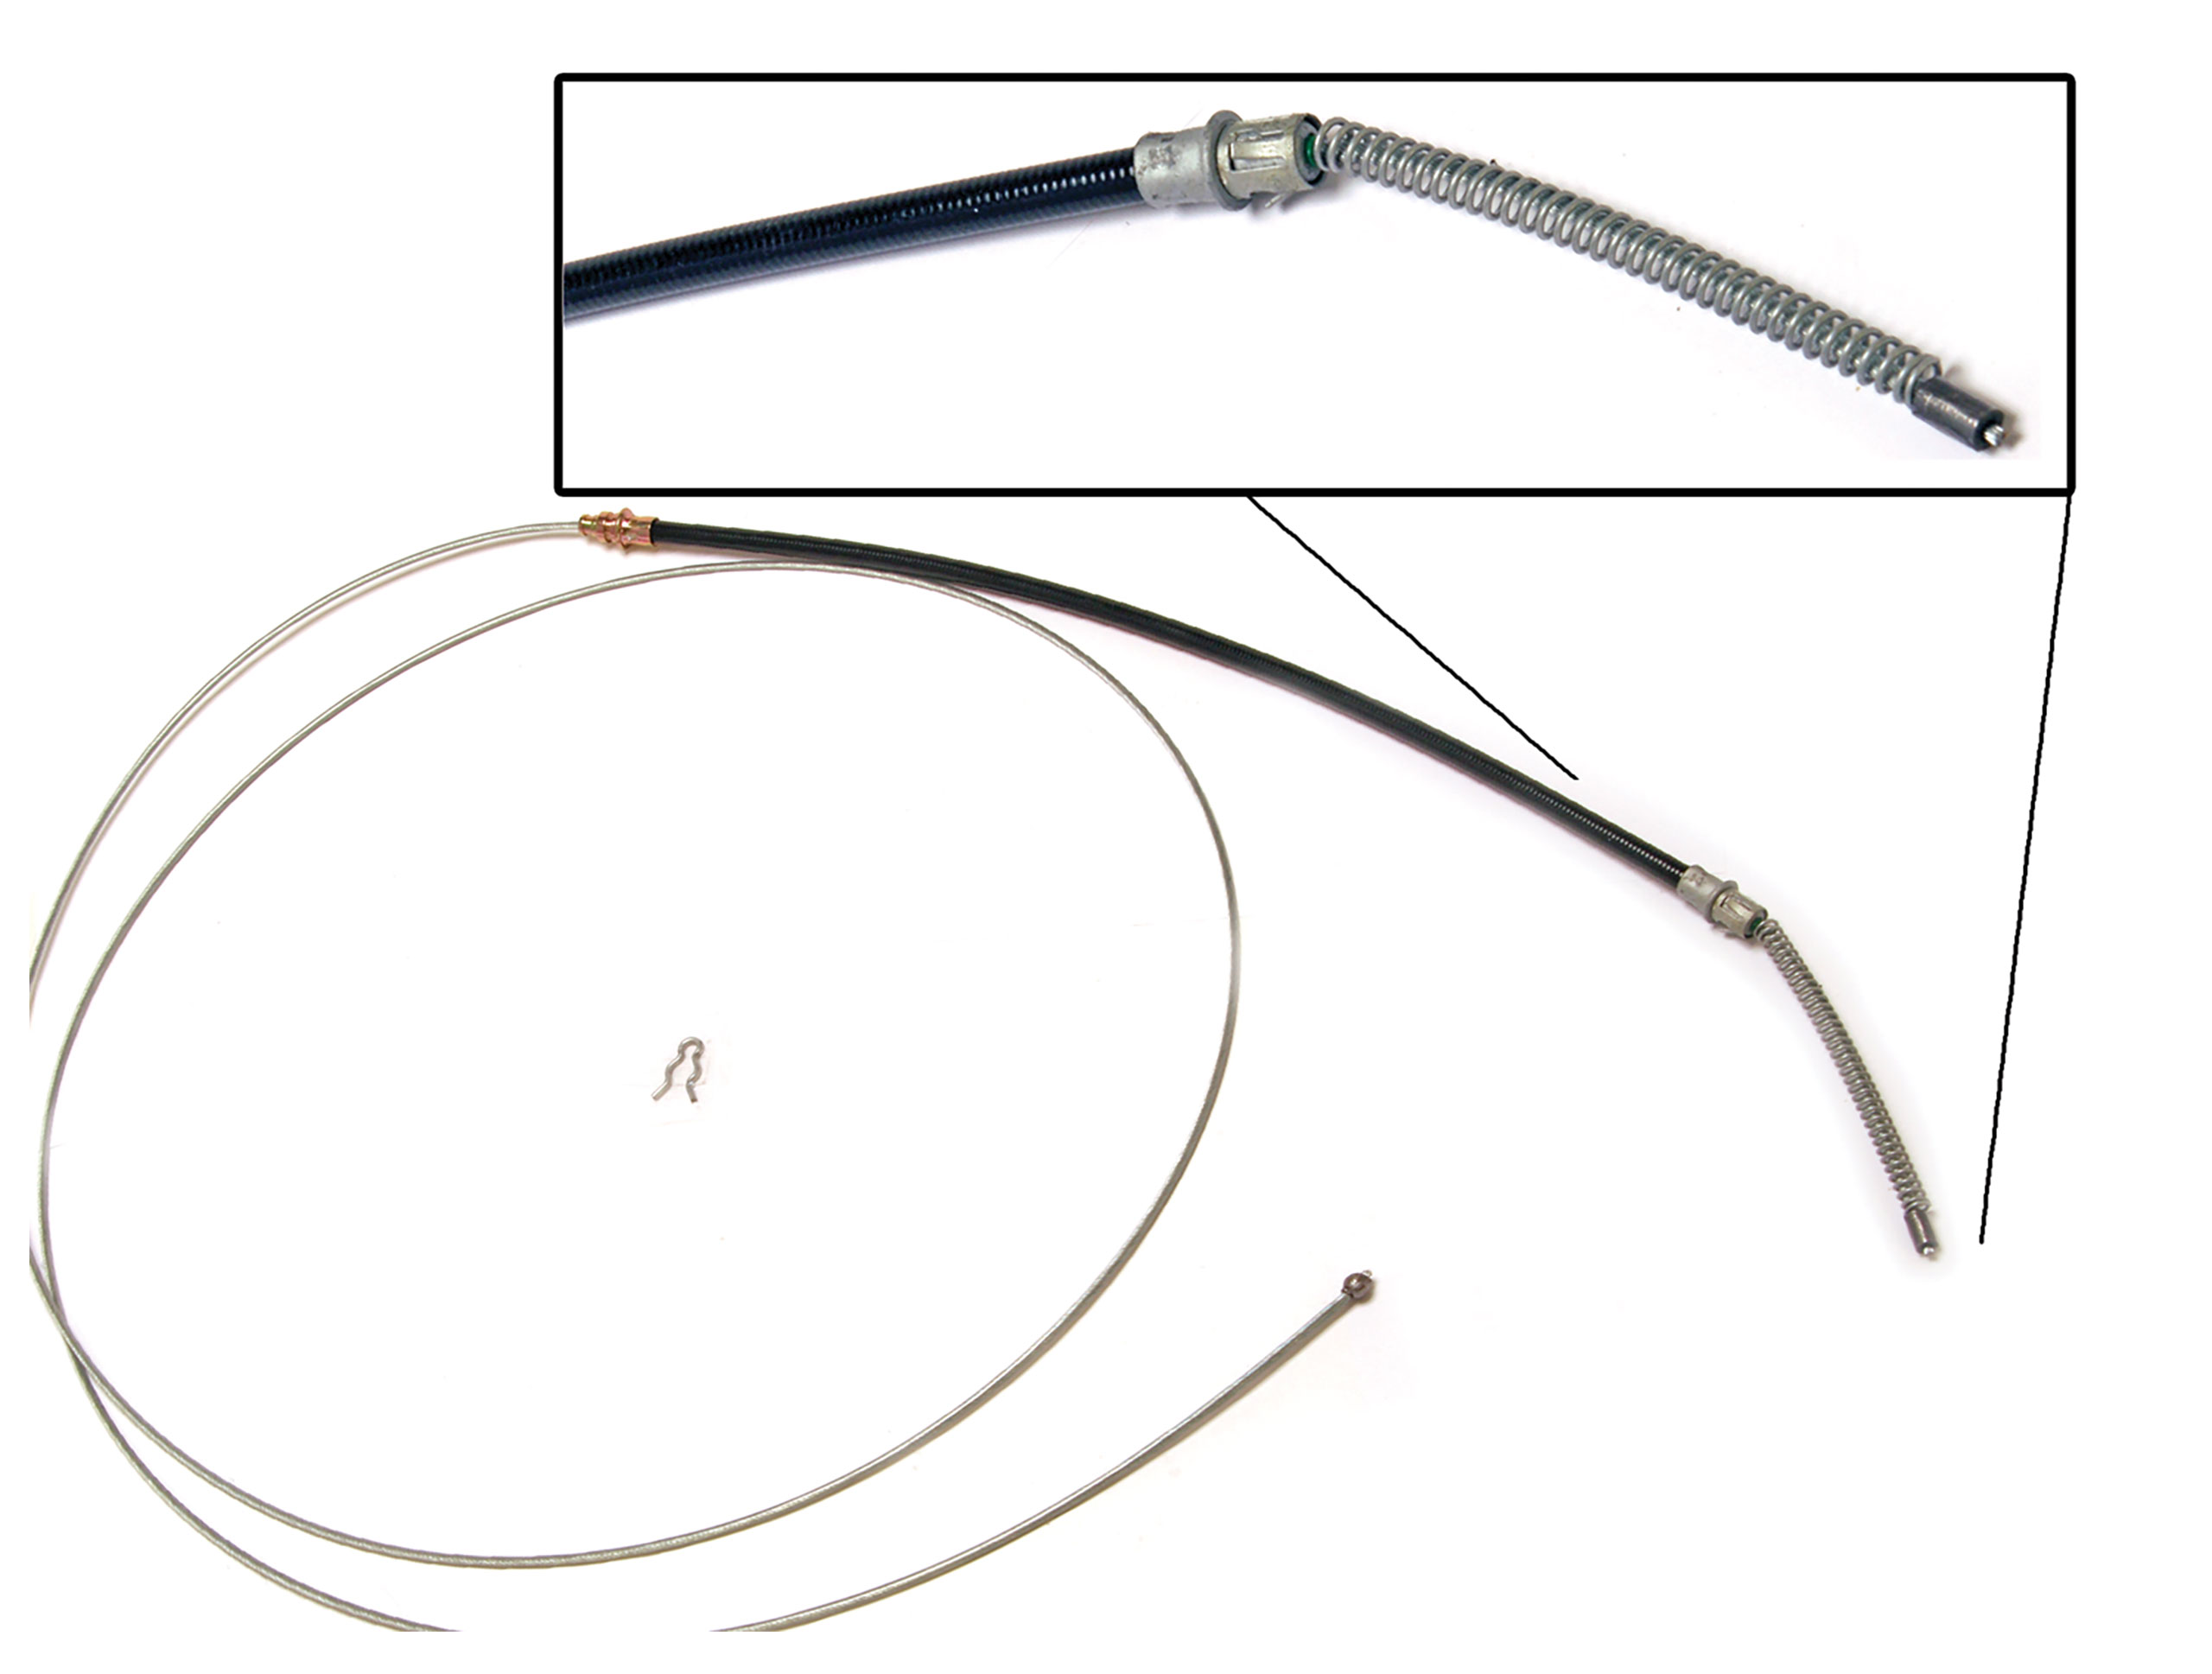 Auto Accessories of America 1970-1973 Ford Mustang Rear Parking Brake Cable - 8 Cylinder - Right Hand